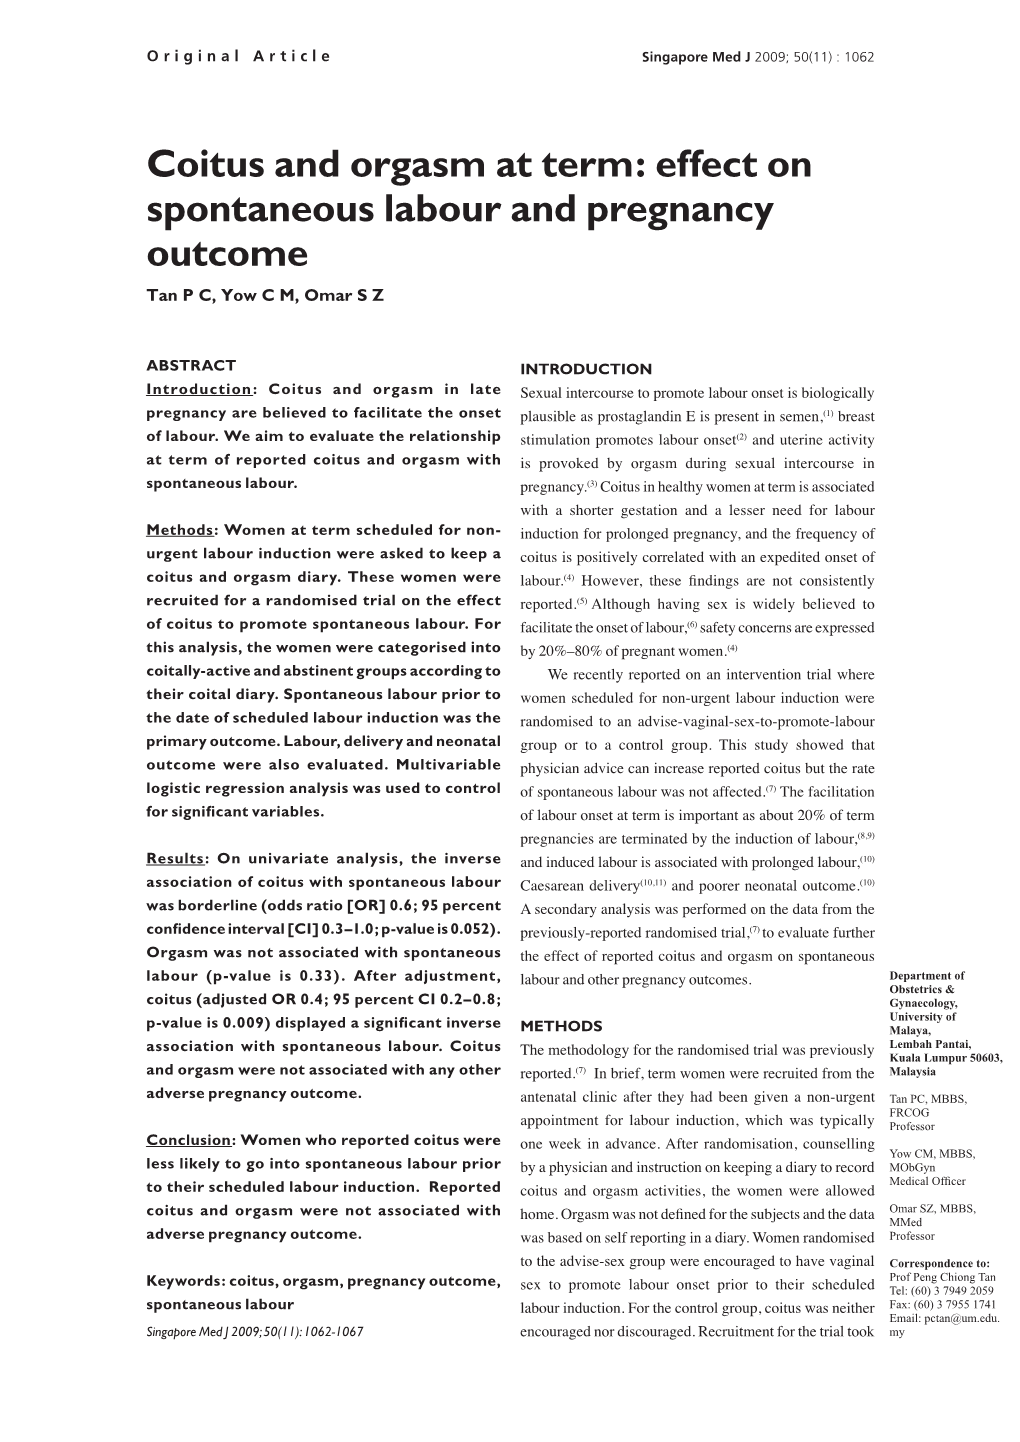 Coitus and Orgasm at Term: Effect on Spontaneous Labour and Pregnancy Outcome Tan P C, Yow C M, Omar S Z